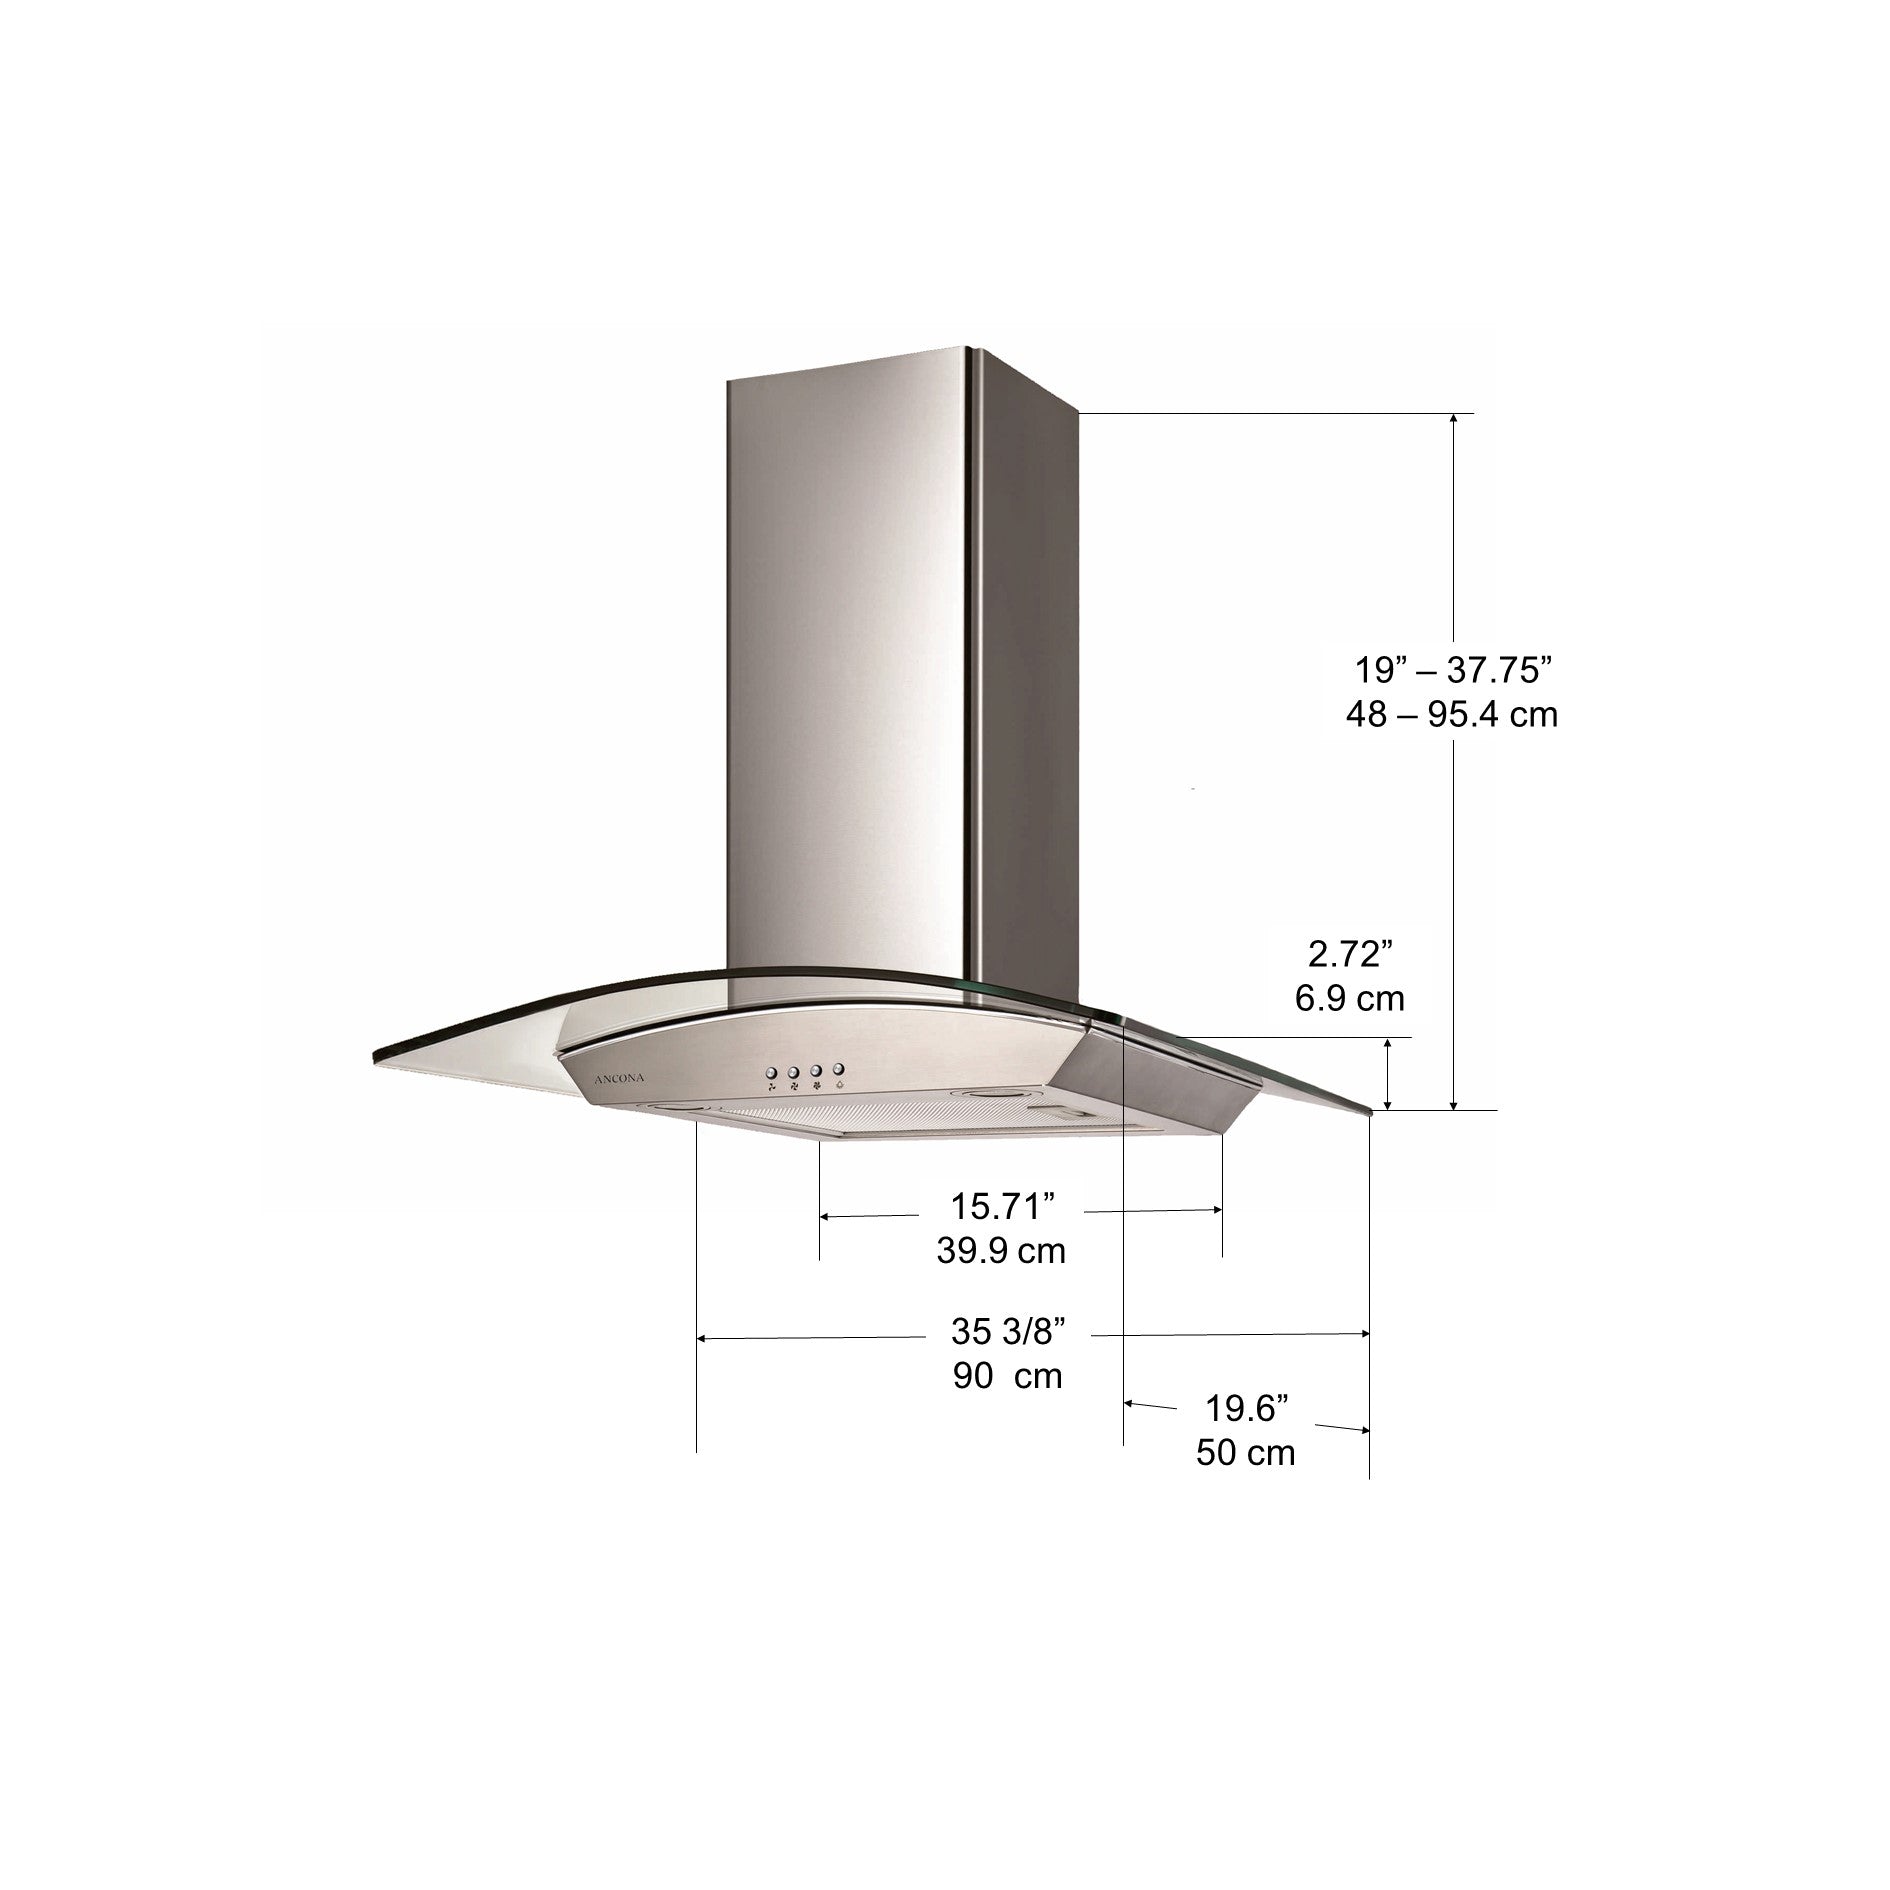 GCP436 36 in. Wall-Mounted Convertible Range Hood in Stainless Steel